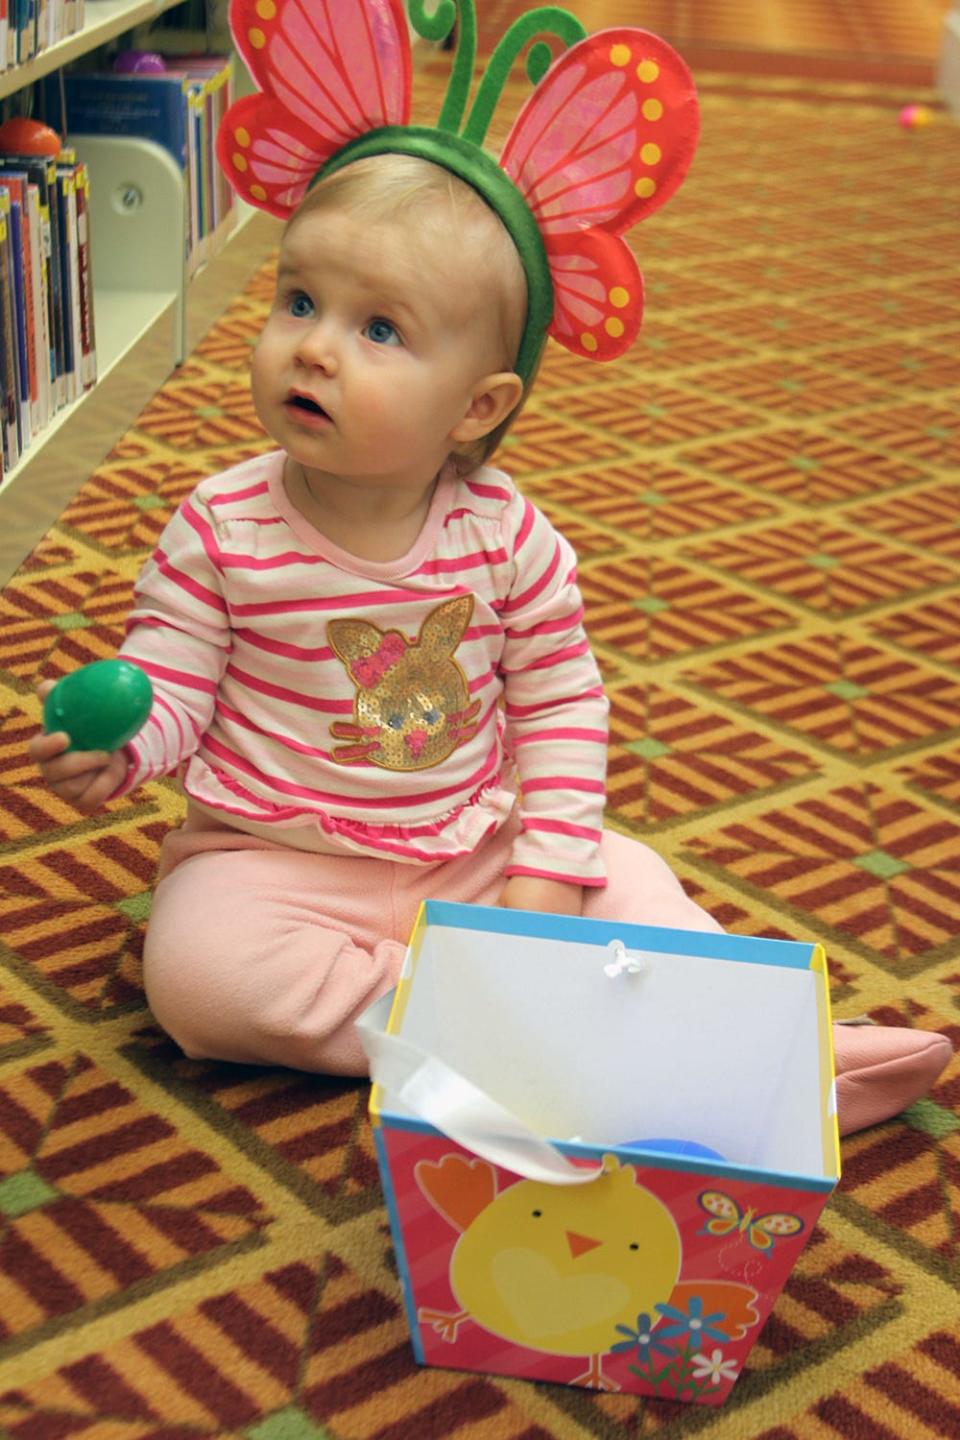 Fiona Douglas, 1, goes through her Easter basket at the Petoskey District Library.